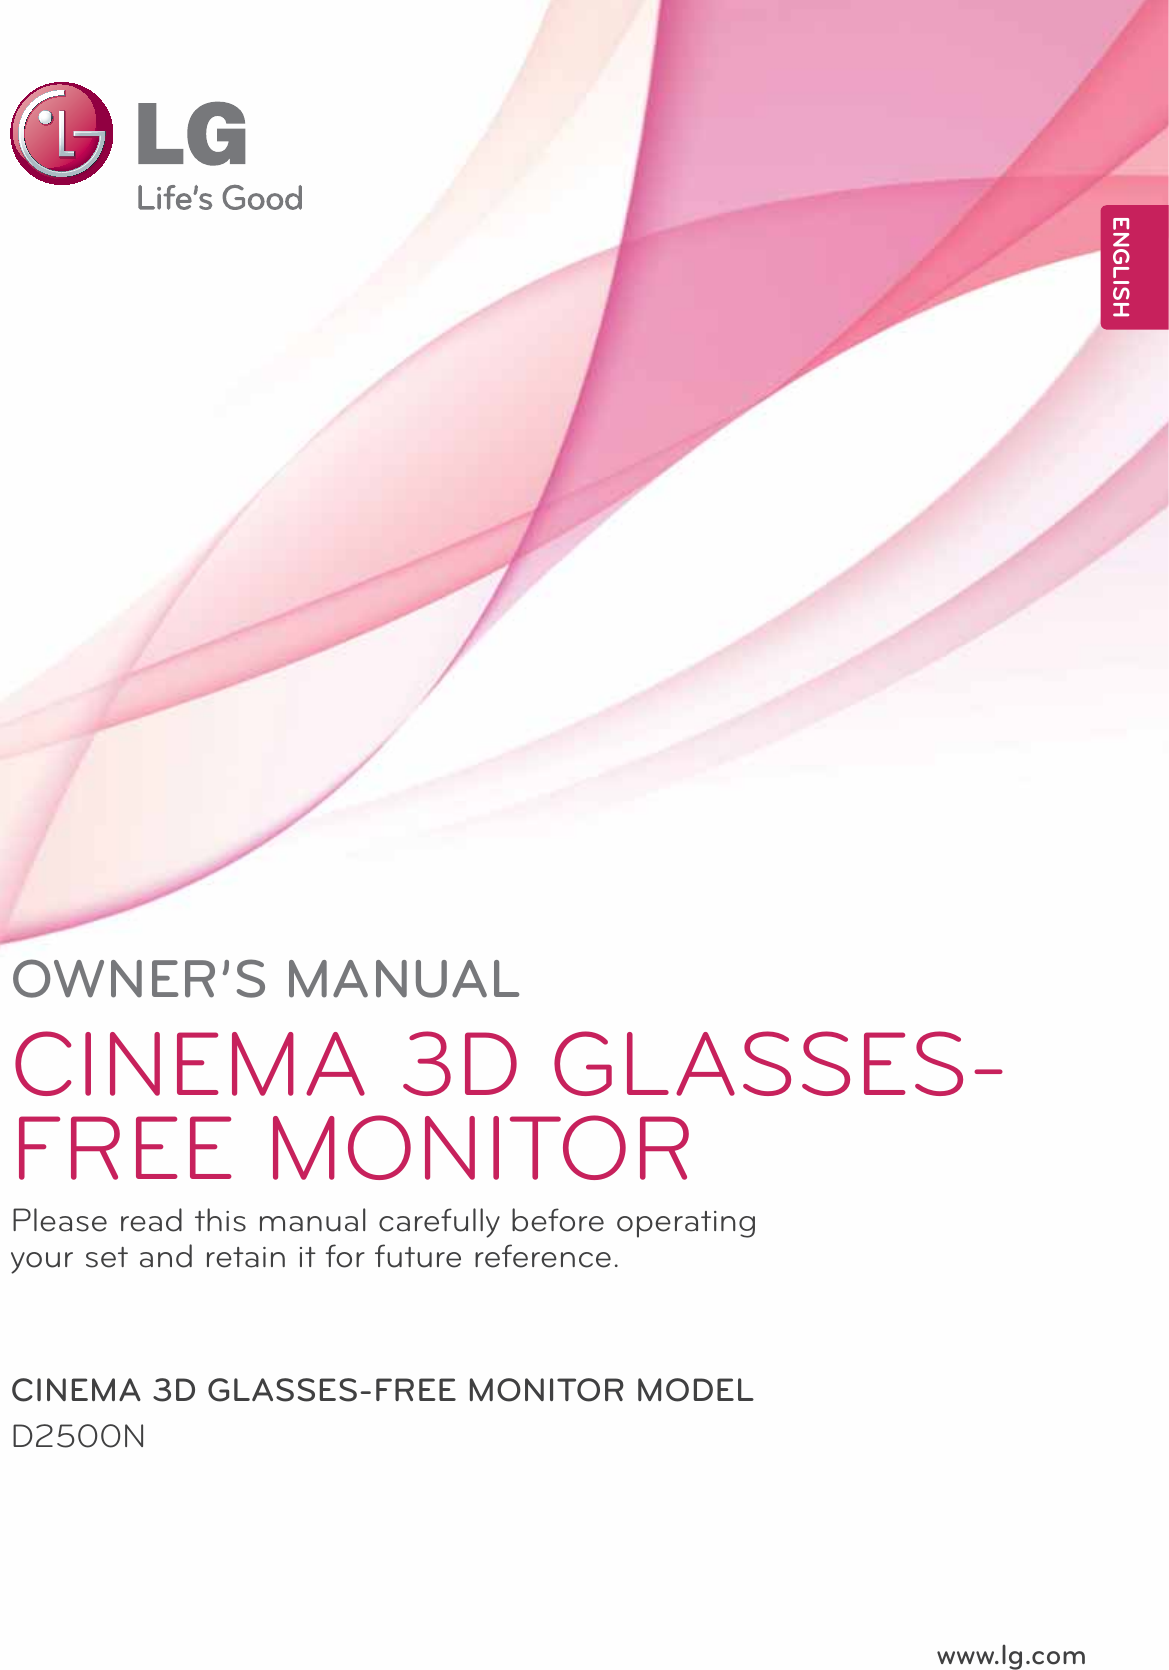 www.lg.comOWNER’S MANUALCINEMA 3D GLASSES-FREE MONITORD2500NPlease read this manual carefully before operating your set and retain it for future reference.CINEMA 3D GLASSES-FREE MONITOR MODELENGLISH